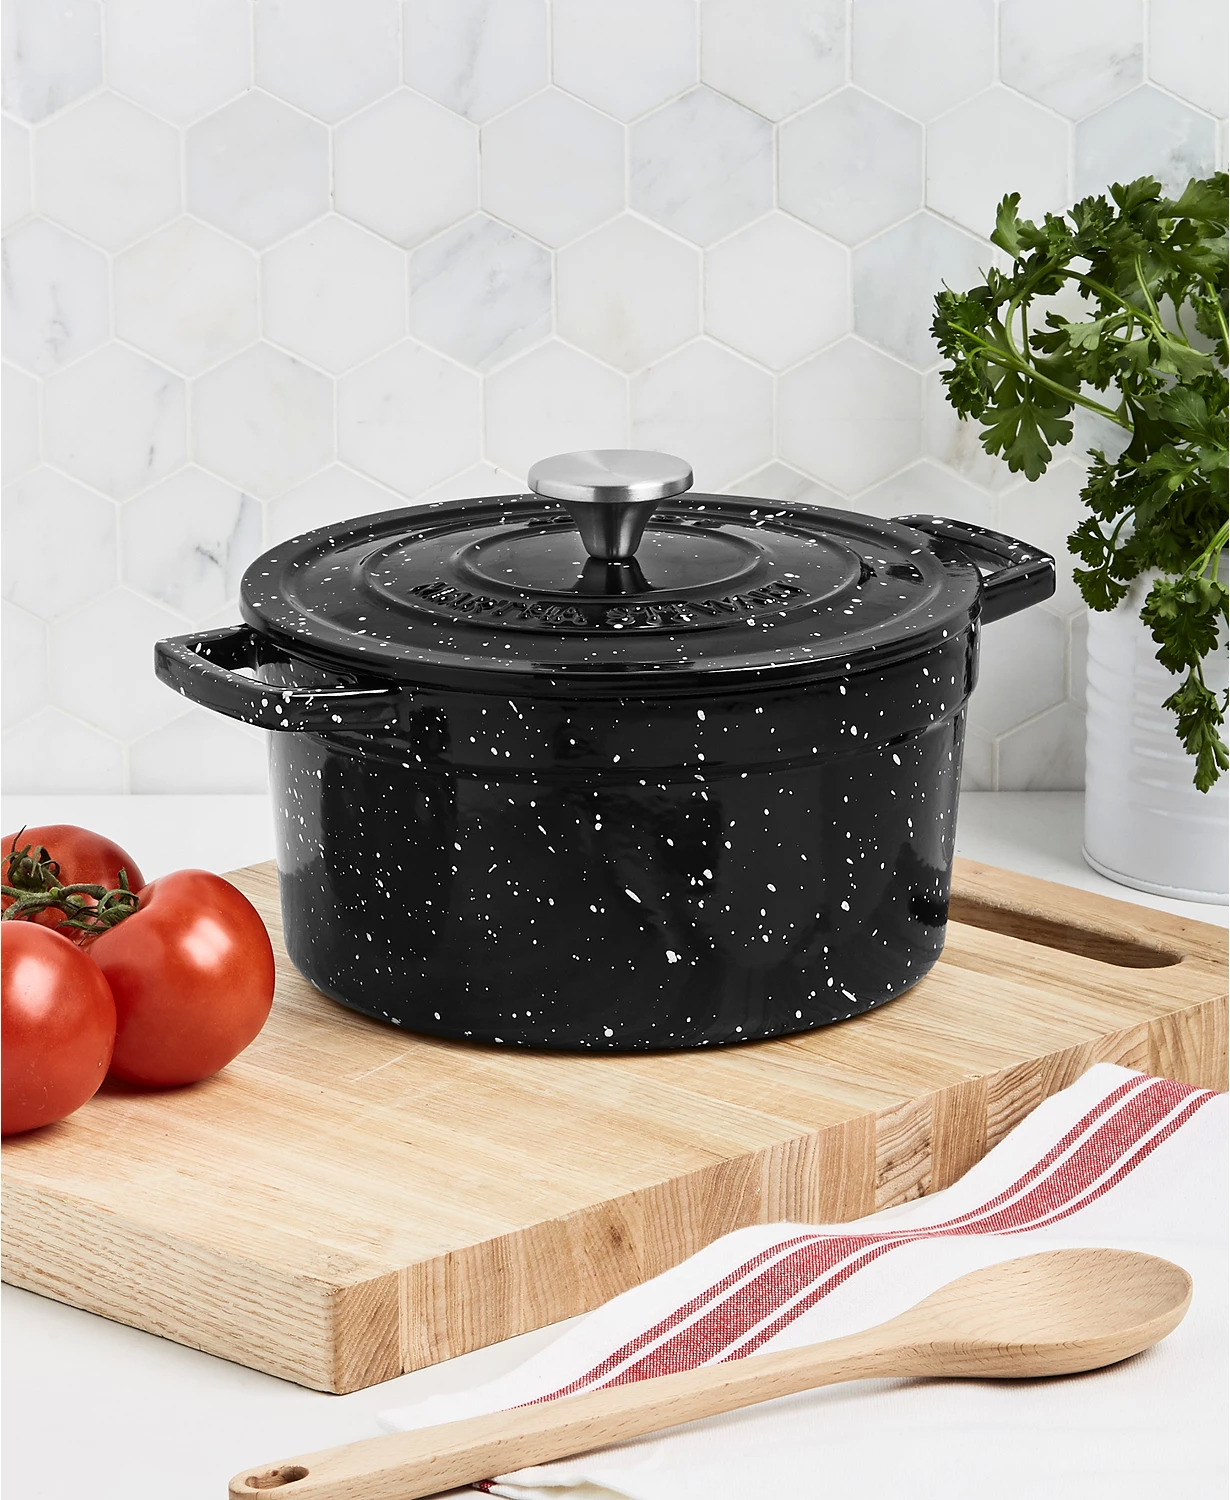 4-Qt. Enameled Cast Iron Speckled Dutch Oven (3 colors) $49.93, 4-Qt. Enameled Cast Iron Round Dutch Oven (6 colors) $50 + 10% Slickdeals Cashback + Free Shipping